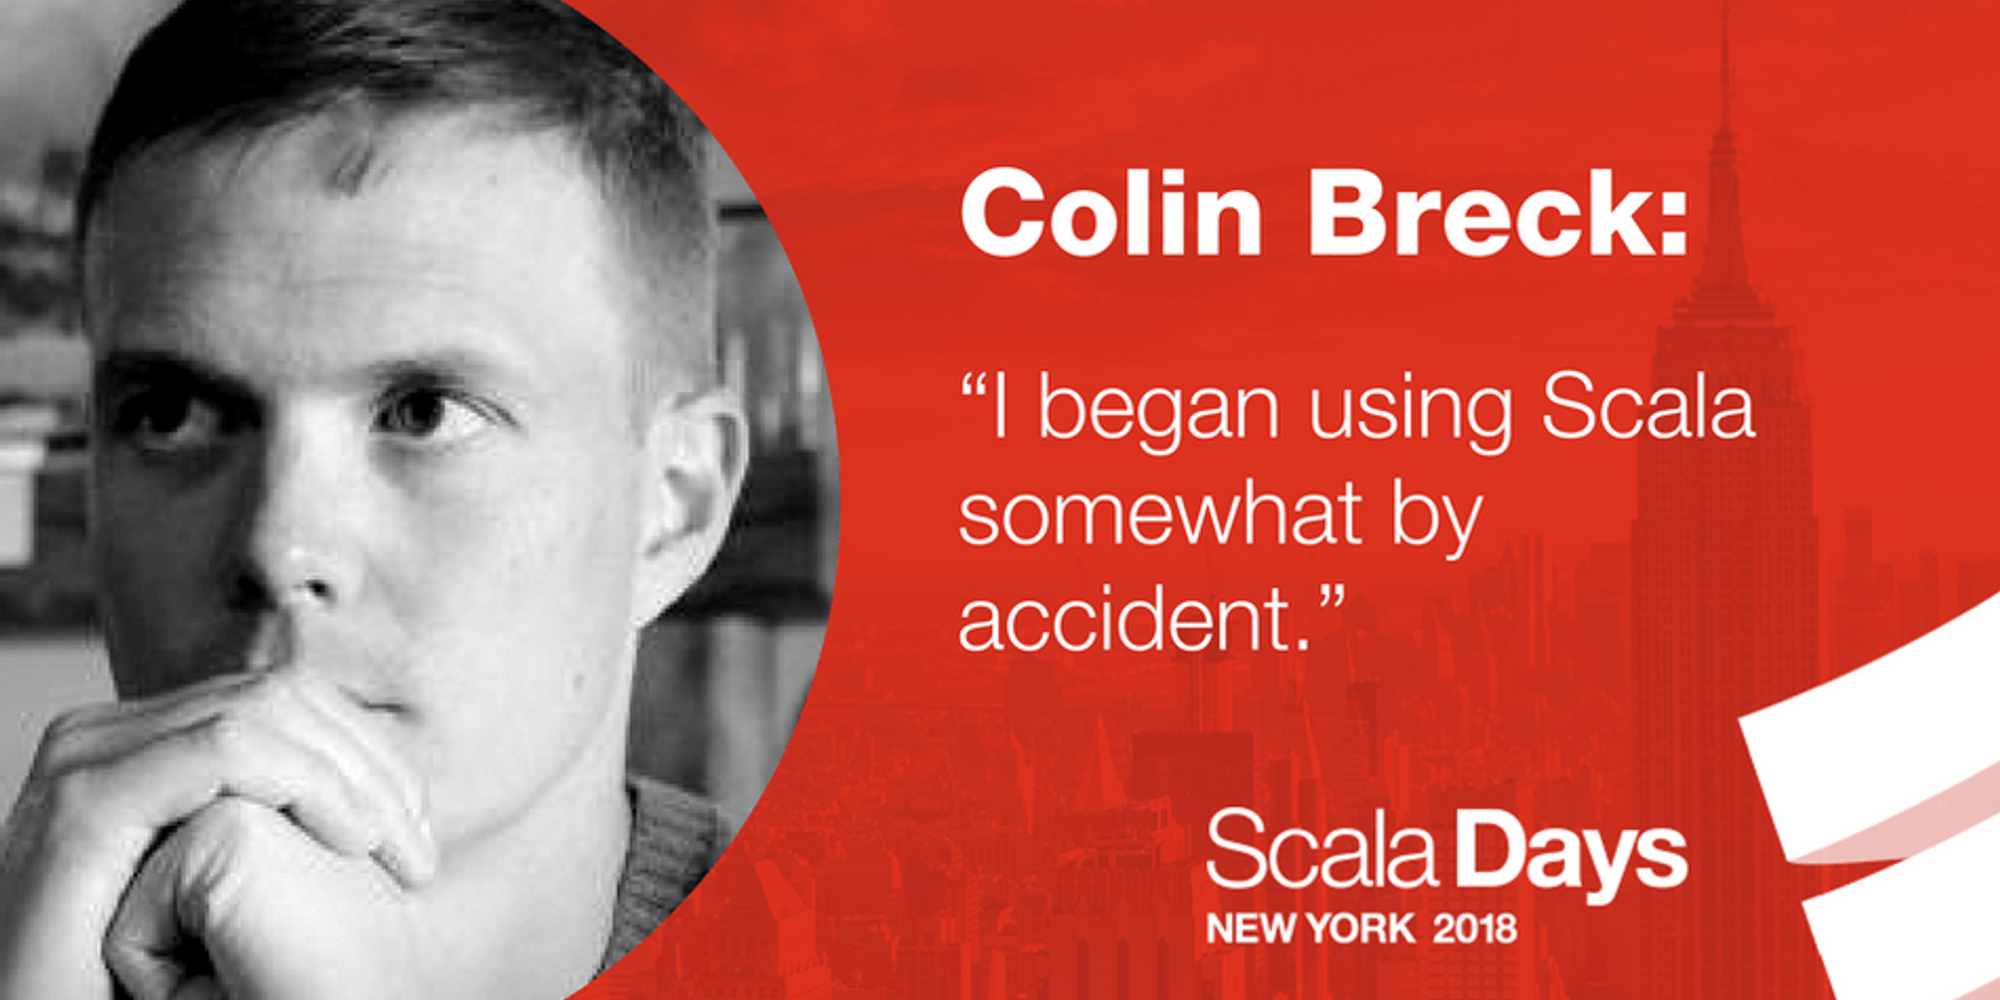 Colin Breck  E2809ci Began Using Scala Somewhat By Accident E2809d